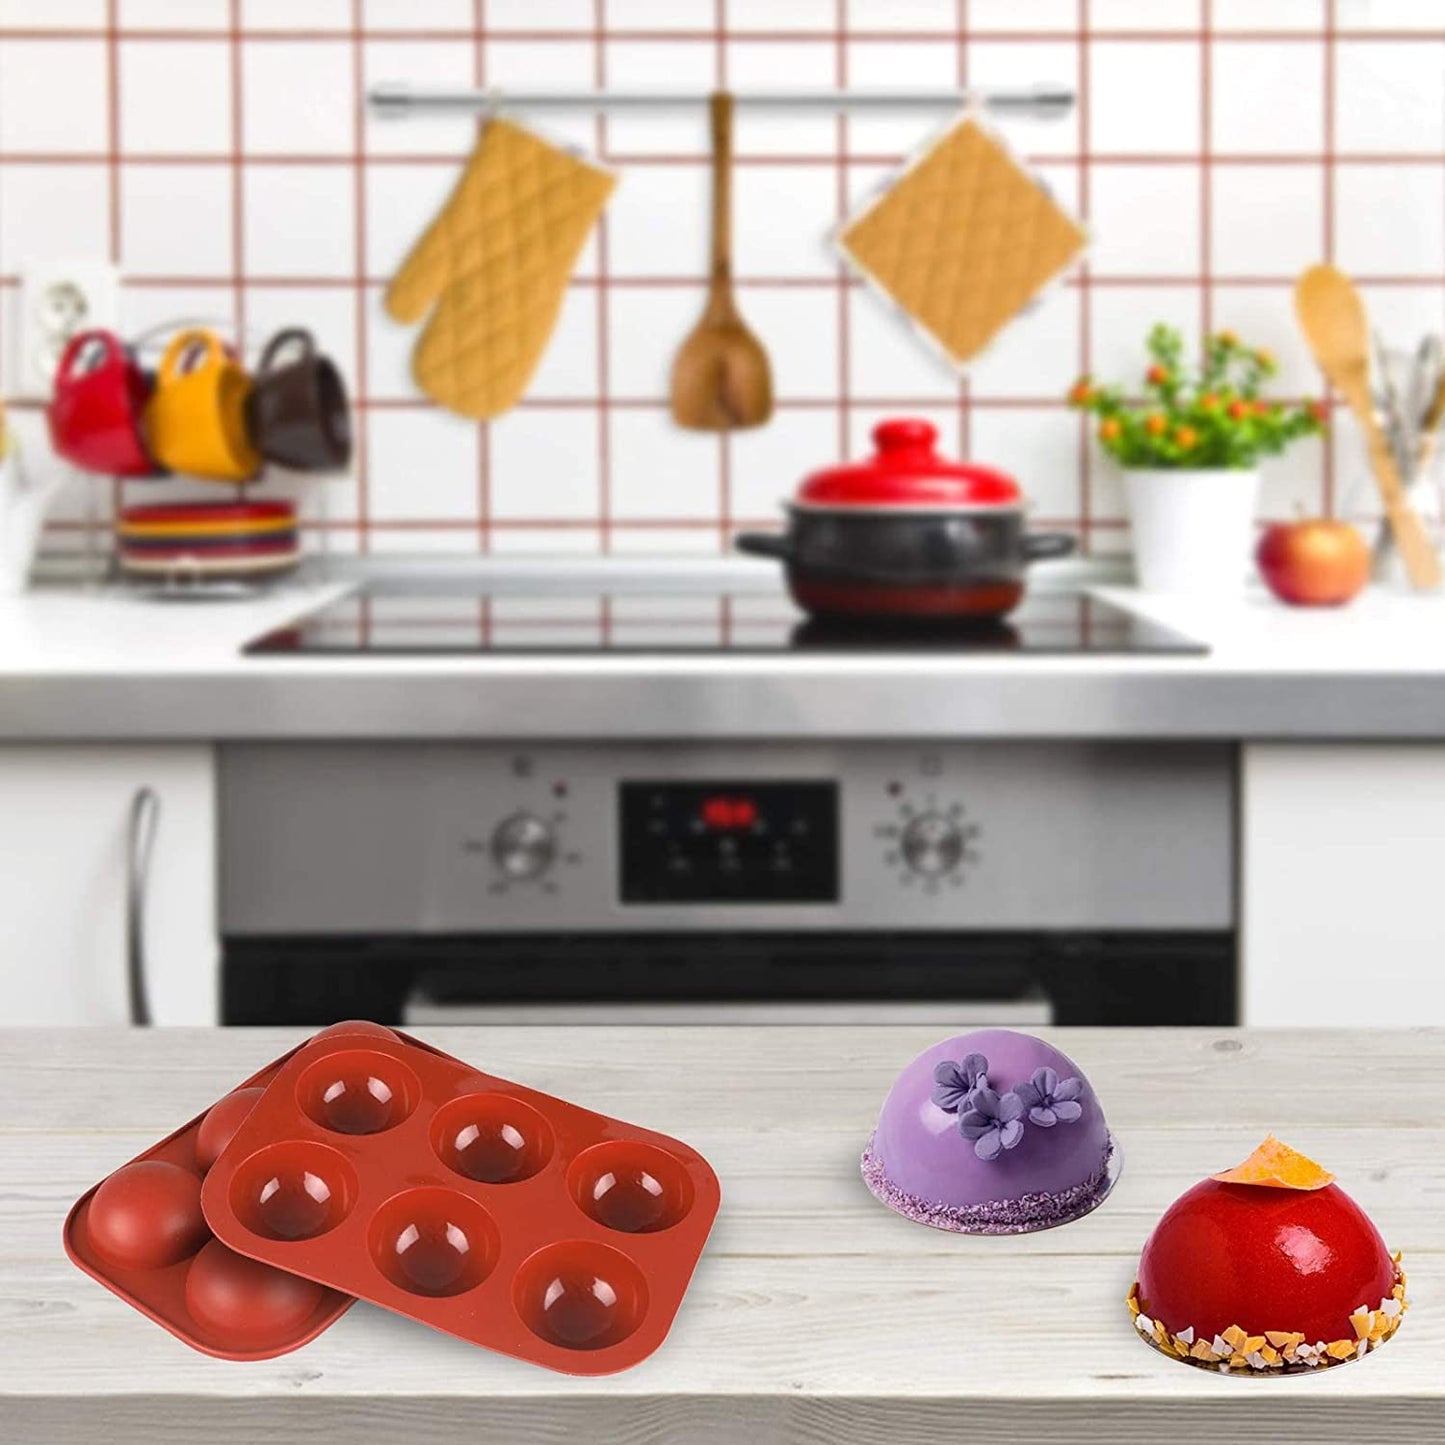 Homchum 2 Pcs Silicone Molds, 6 Holes Semi Sphere Chocolate Molds, BPA Free Silicone Baking Mold for Making Hot Chocolate Bombs, Hot Cocoa Bomb, Cake, Jelly, Dessert, Dome Mousse, Candy, Pudding